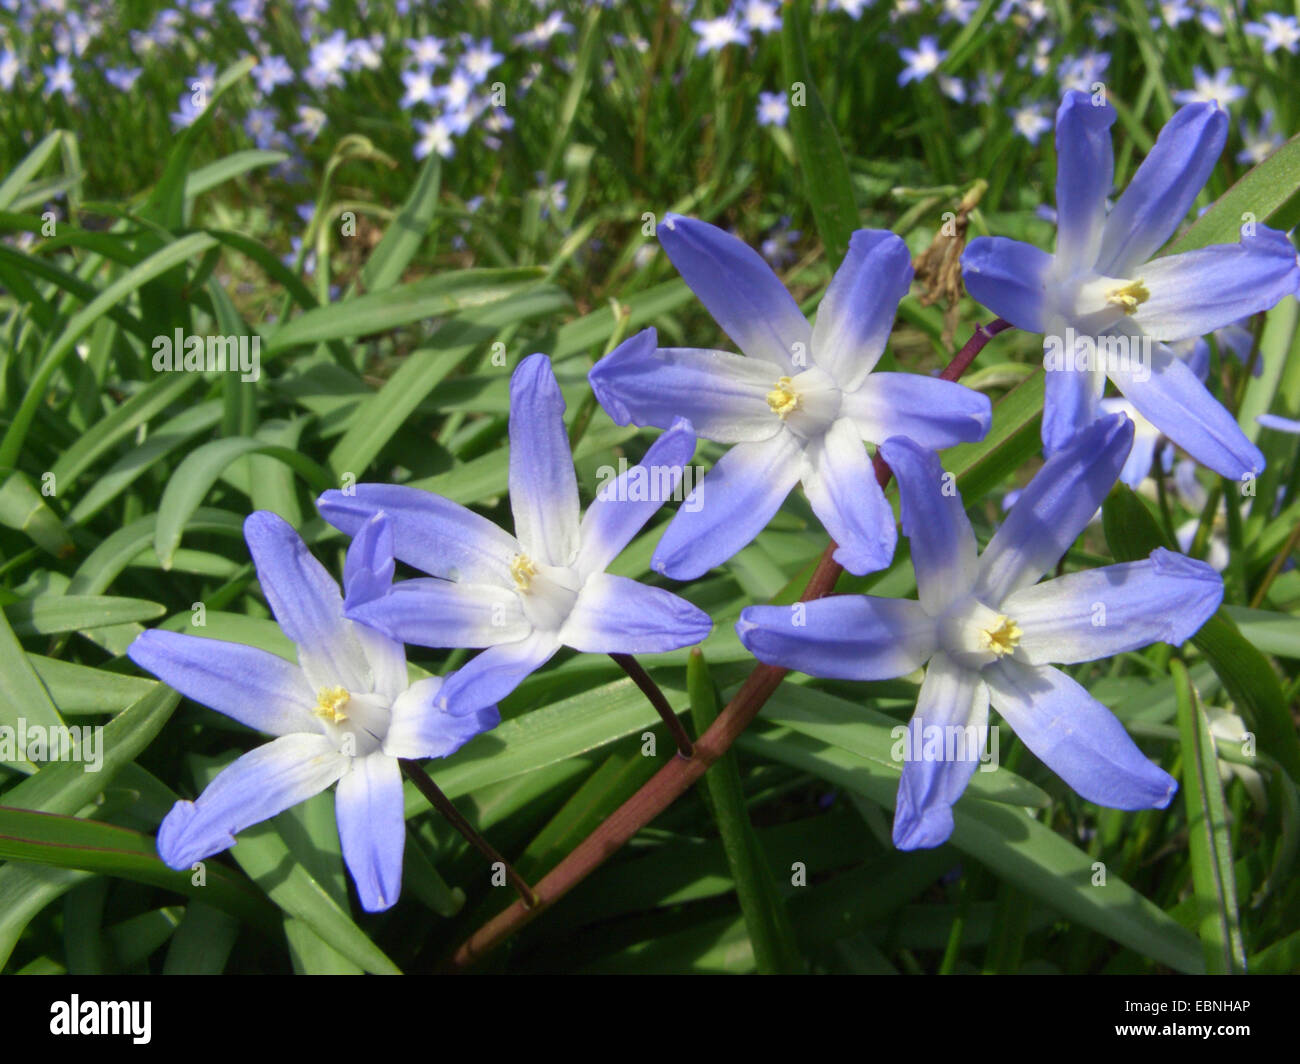 Glory-of-the-Snow, Glory of the Snow (Chionodoxa luciliae, Scilla luciliae), blooming Stock Photo